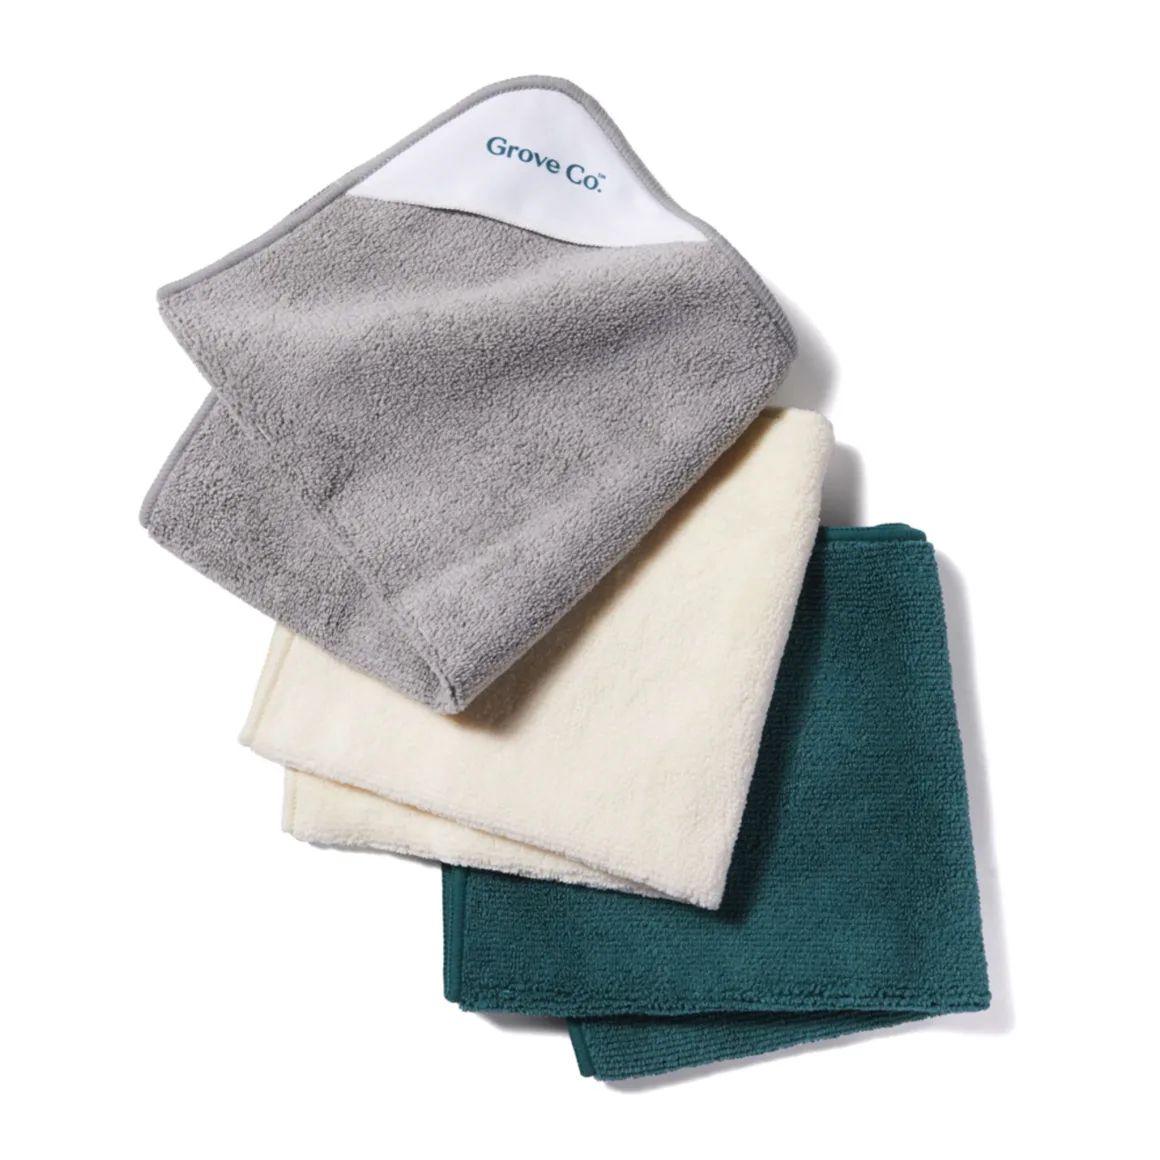 Grove Co. Microfiber Cleaning Cloths (Set of 3) | Grove